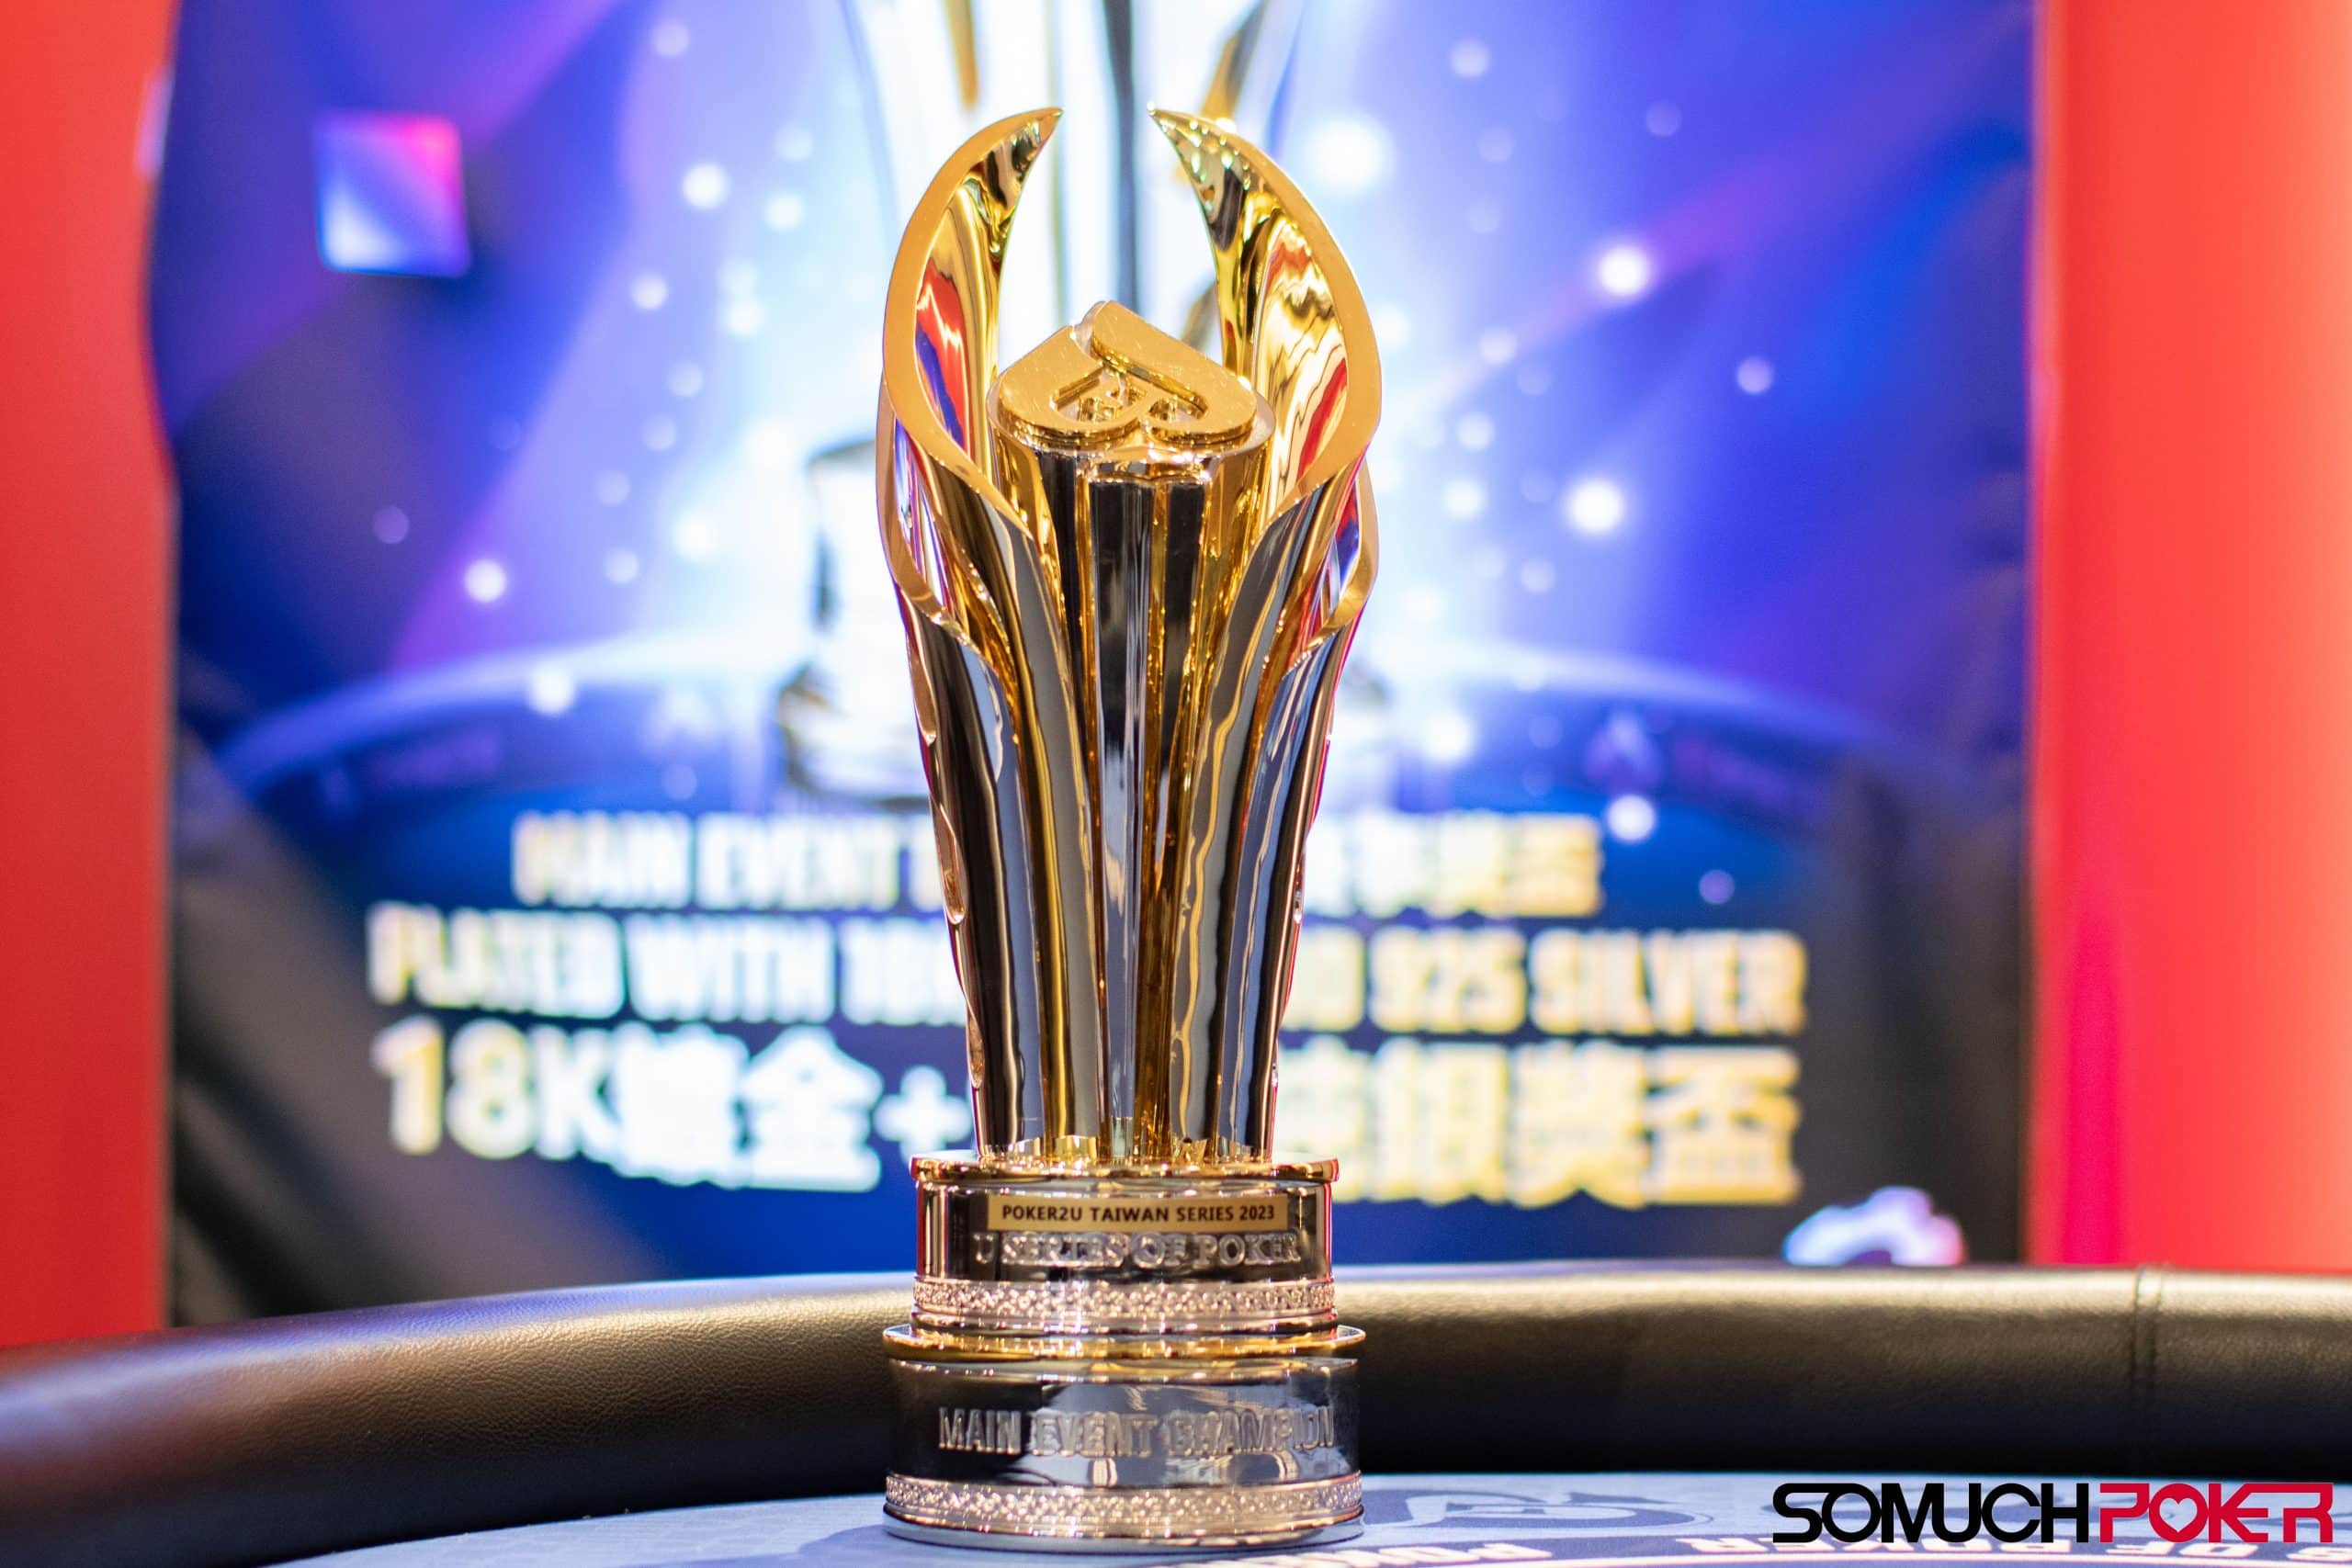 USOP Poker2U Taiwan Series: Final 11 hunt down Main Event title and TWD 3M top prize; Super High Roller still open